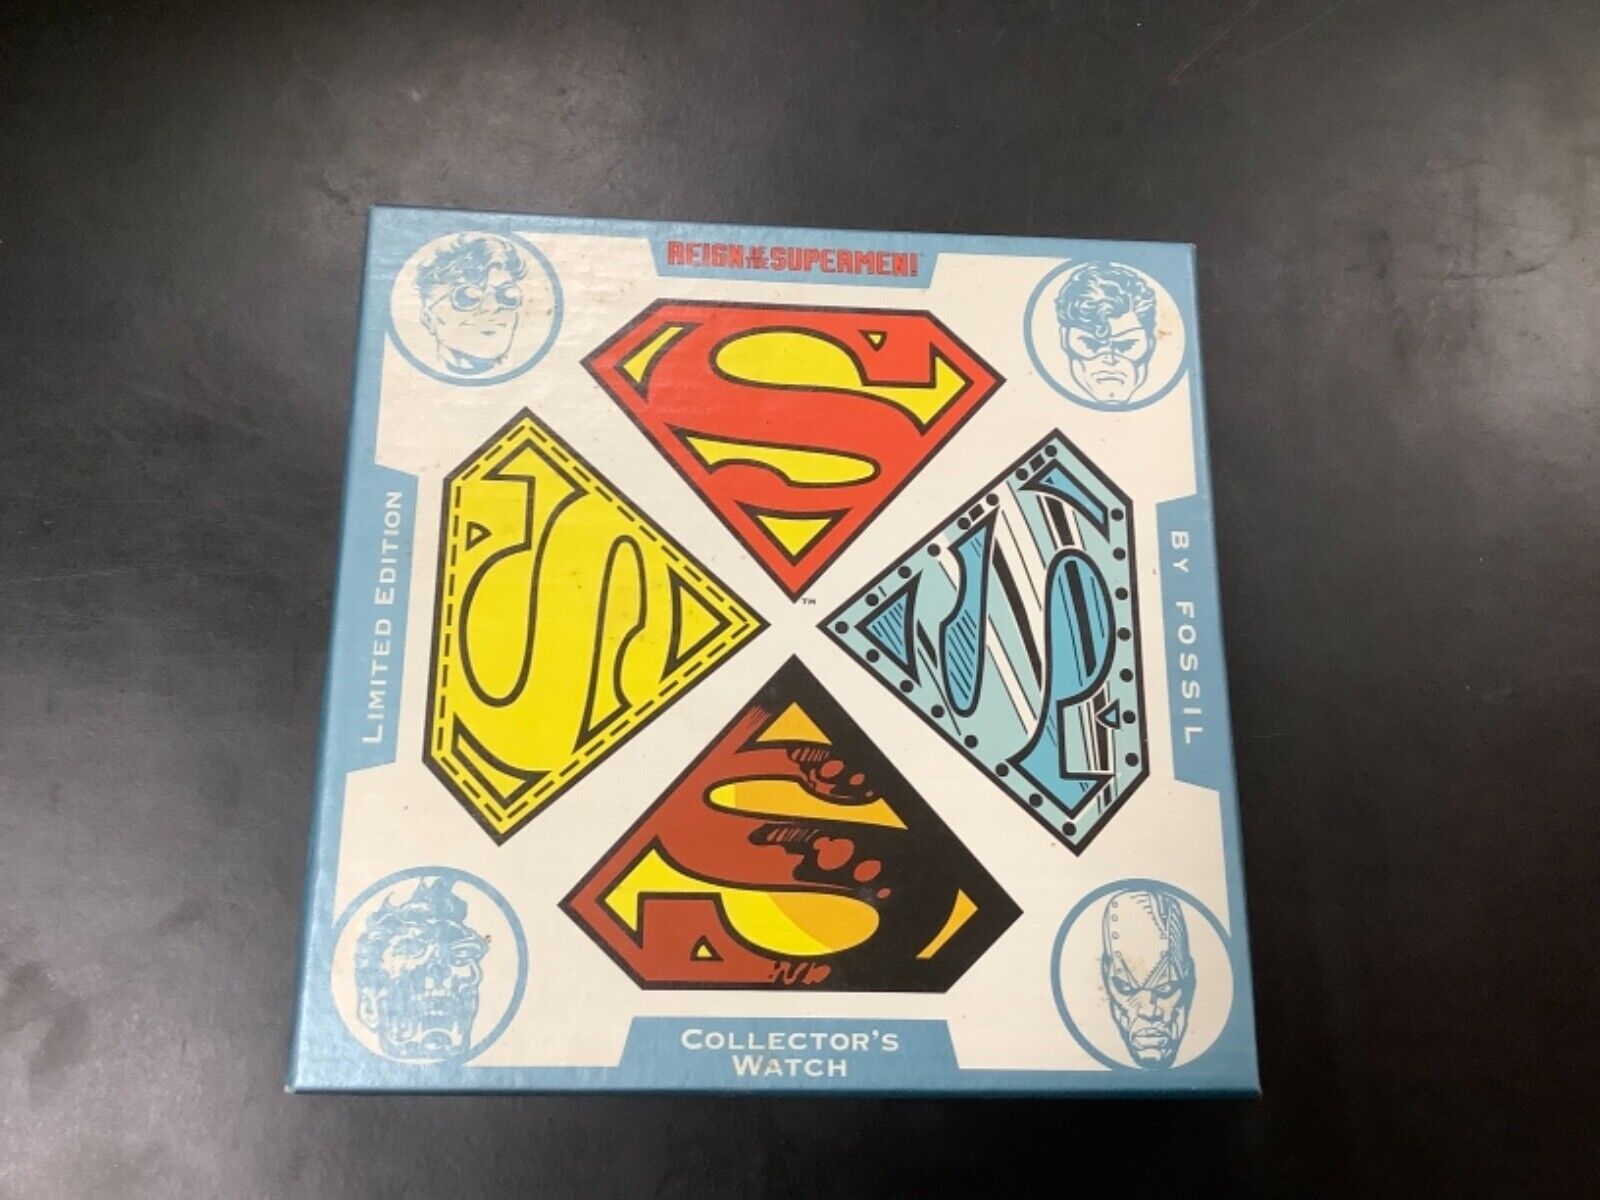 Reign Of The Supermen Limited Edition Collectors Watch By Fossil The Kryptonian